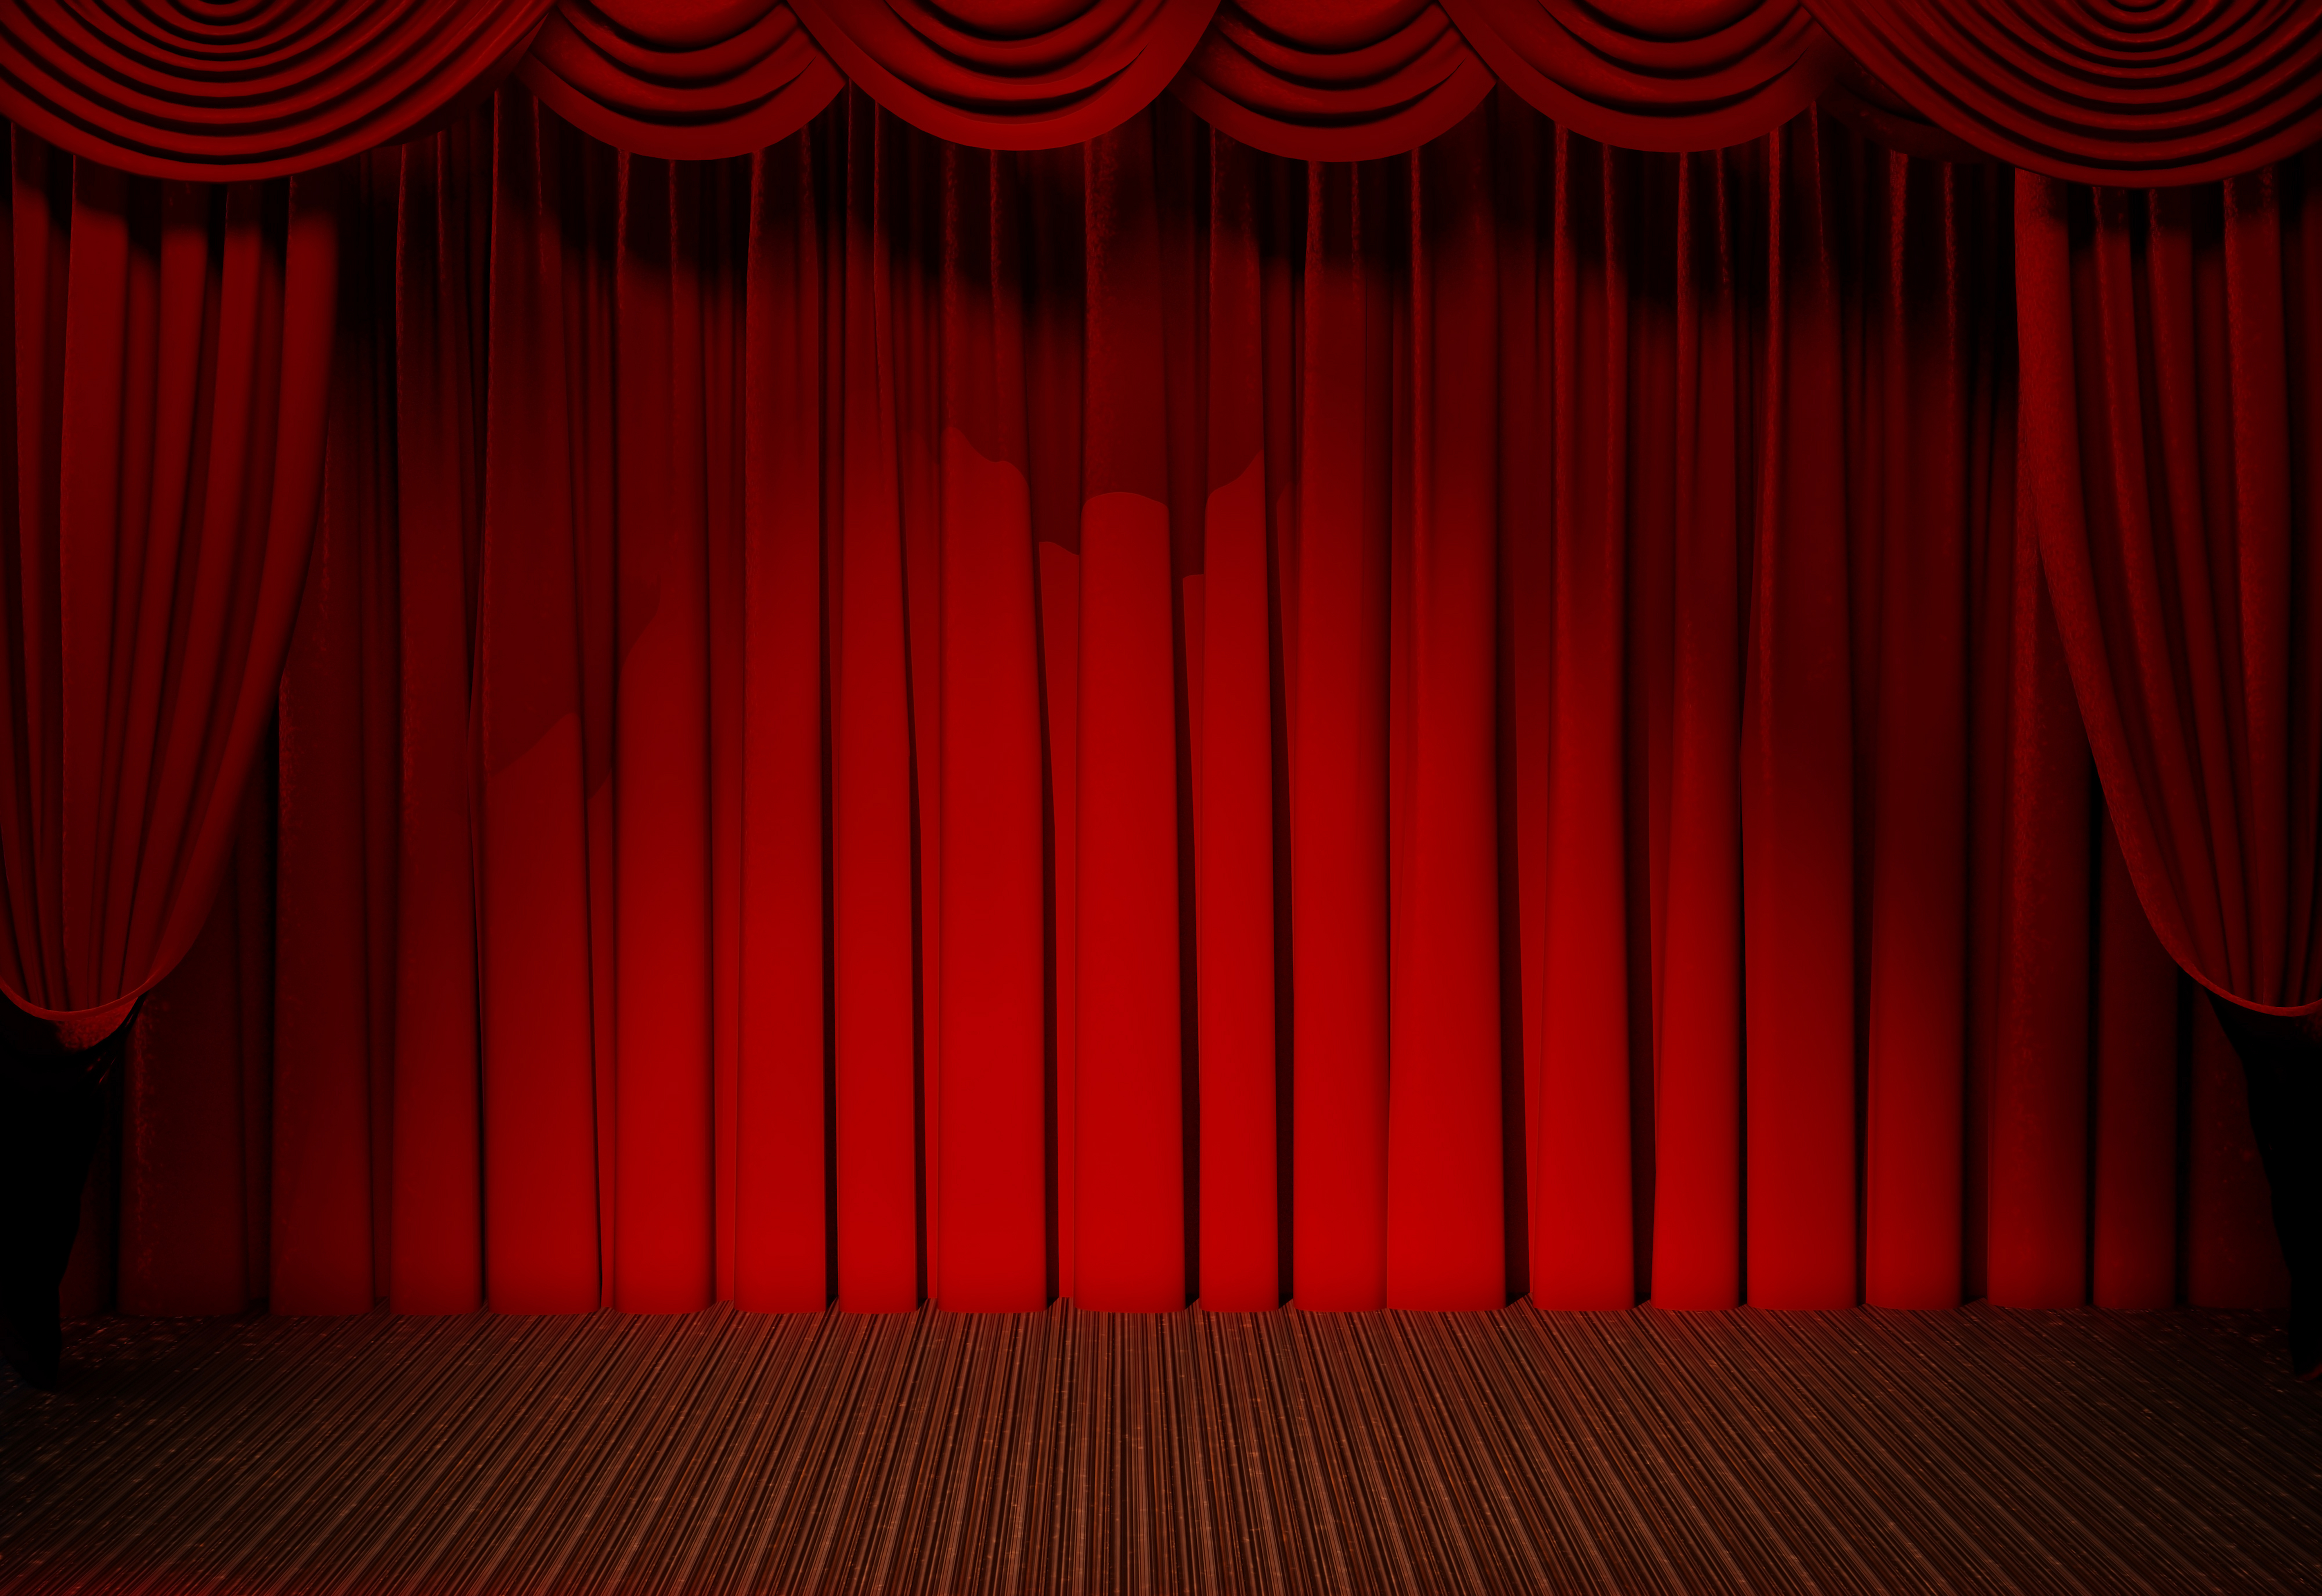 Red Curtain Background Texture 02 by llexandro on DeviantArt